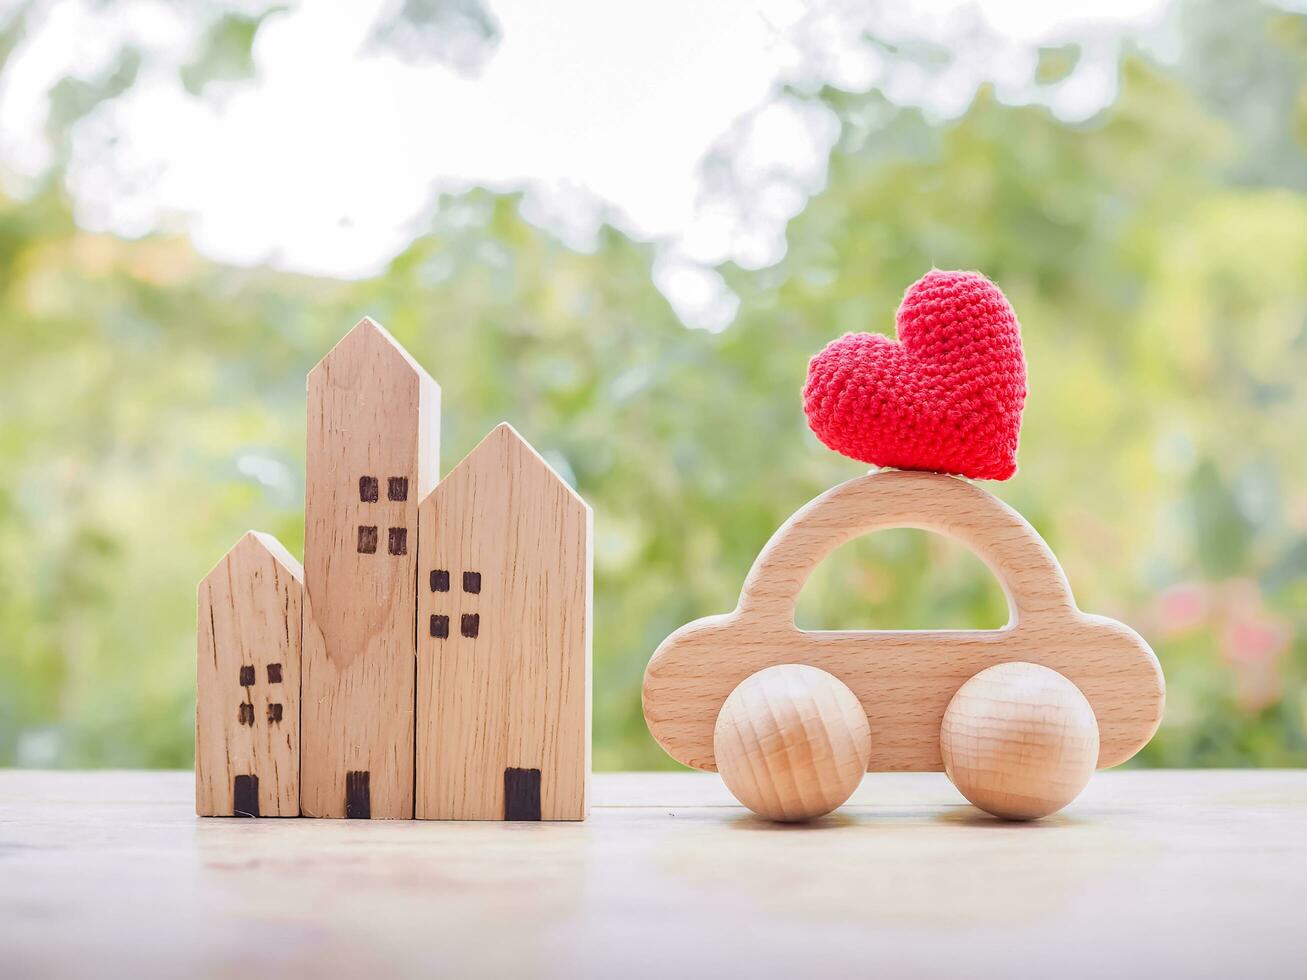 Miniature house, Red heart and wooden toy car. Concept of family photo